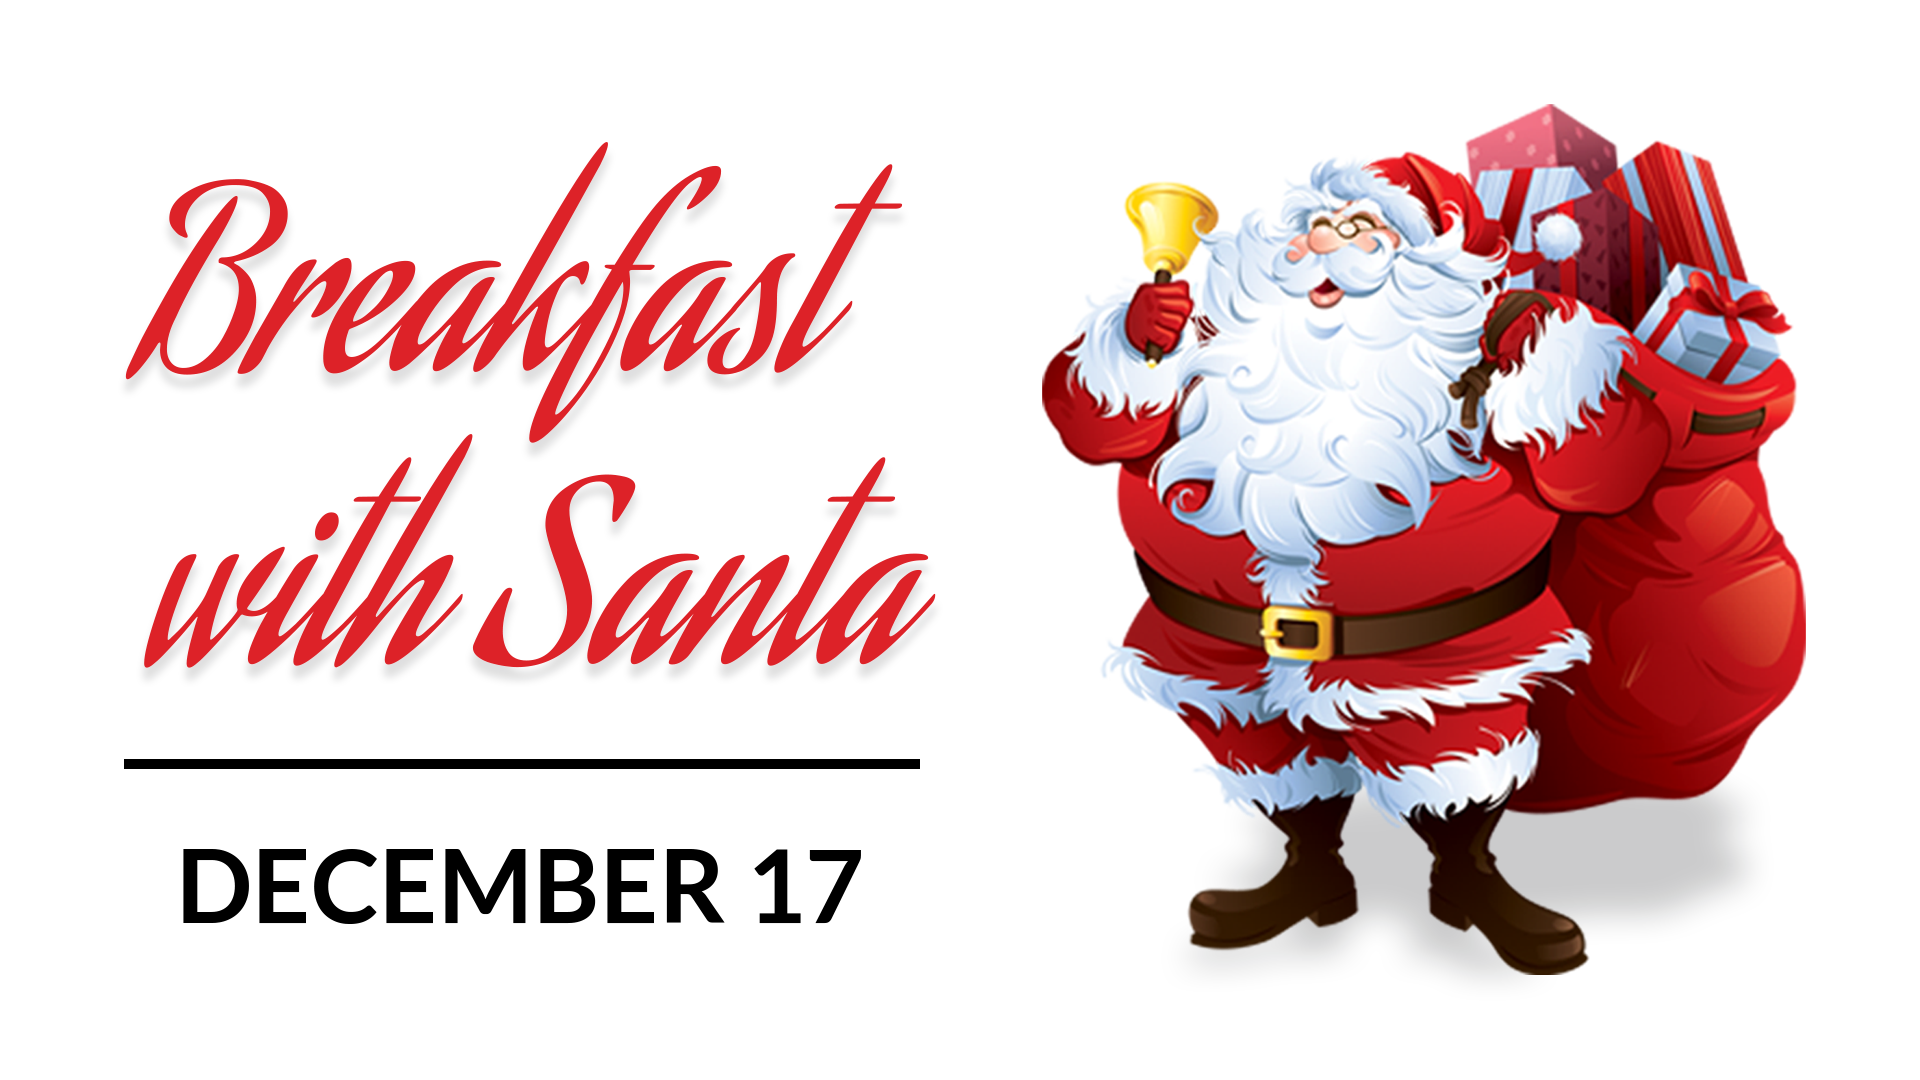 Breakfast with Santa Taphouse 23